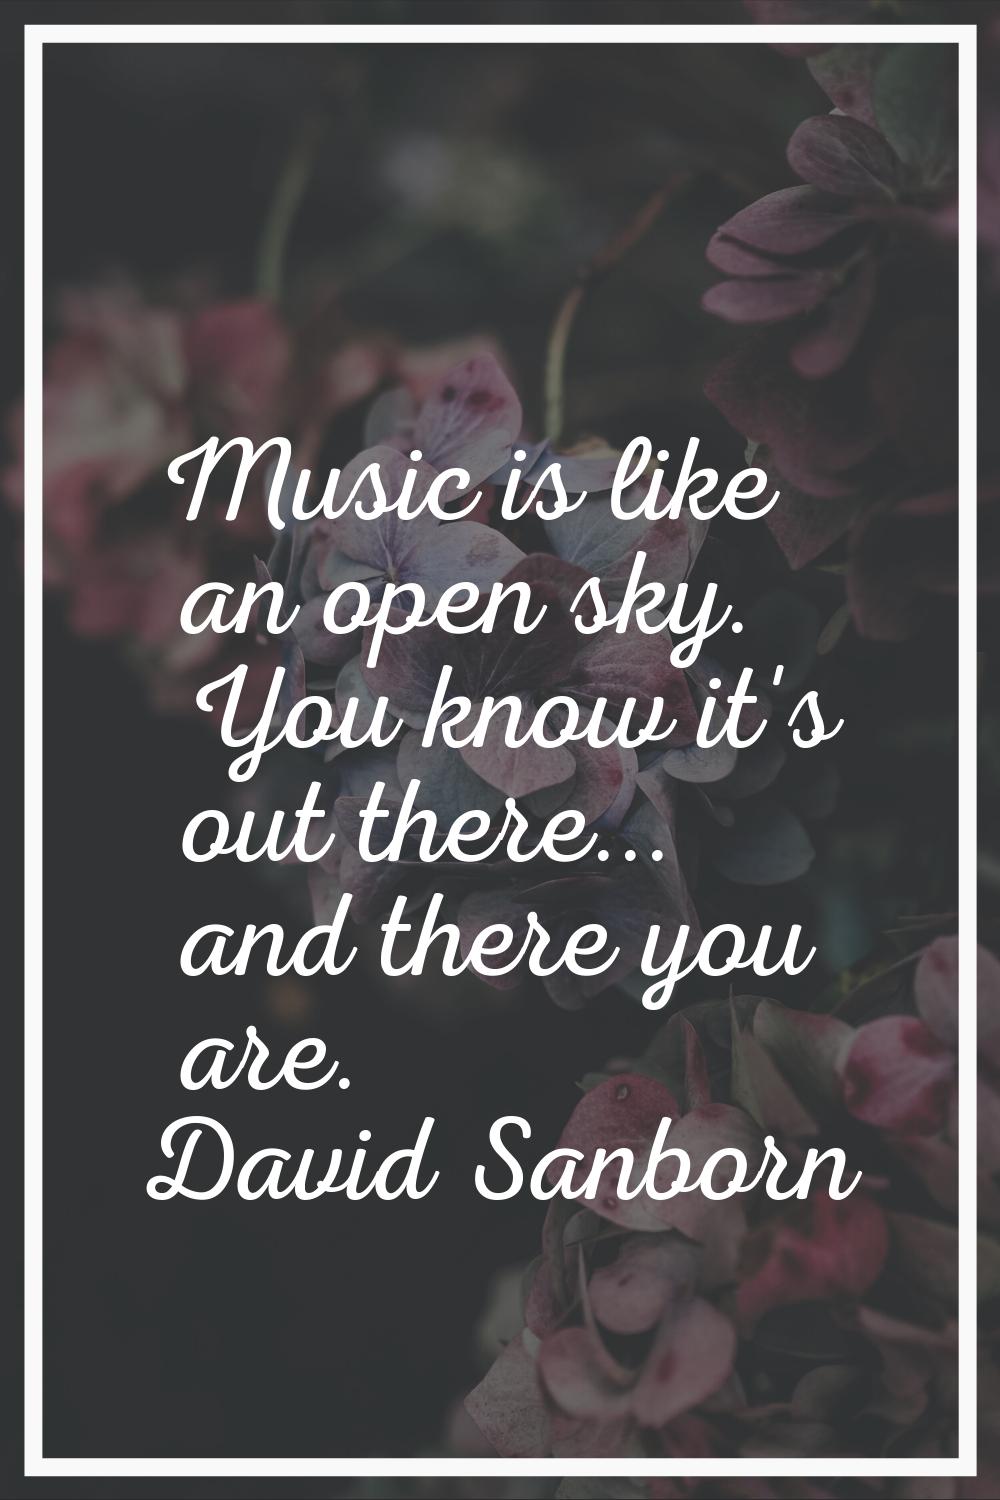 Music is like an open sky. You know it's out there... and there you are.